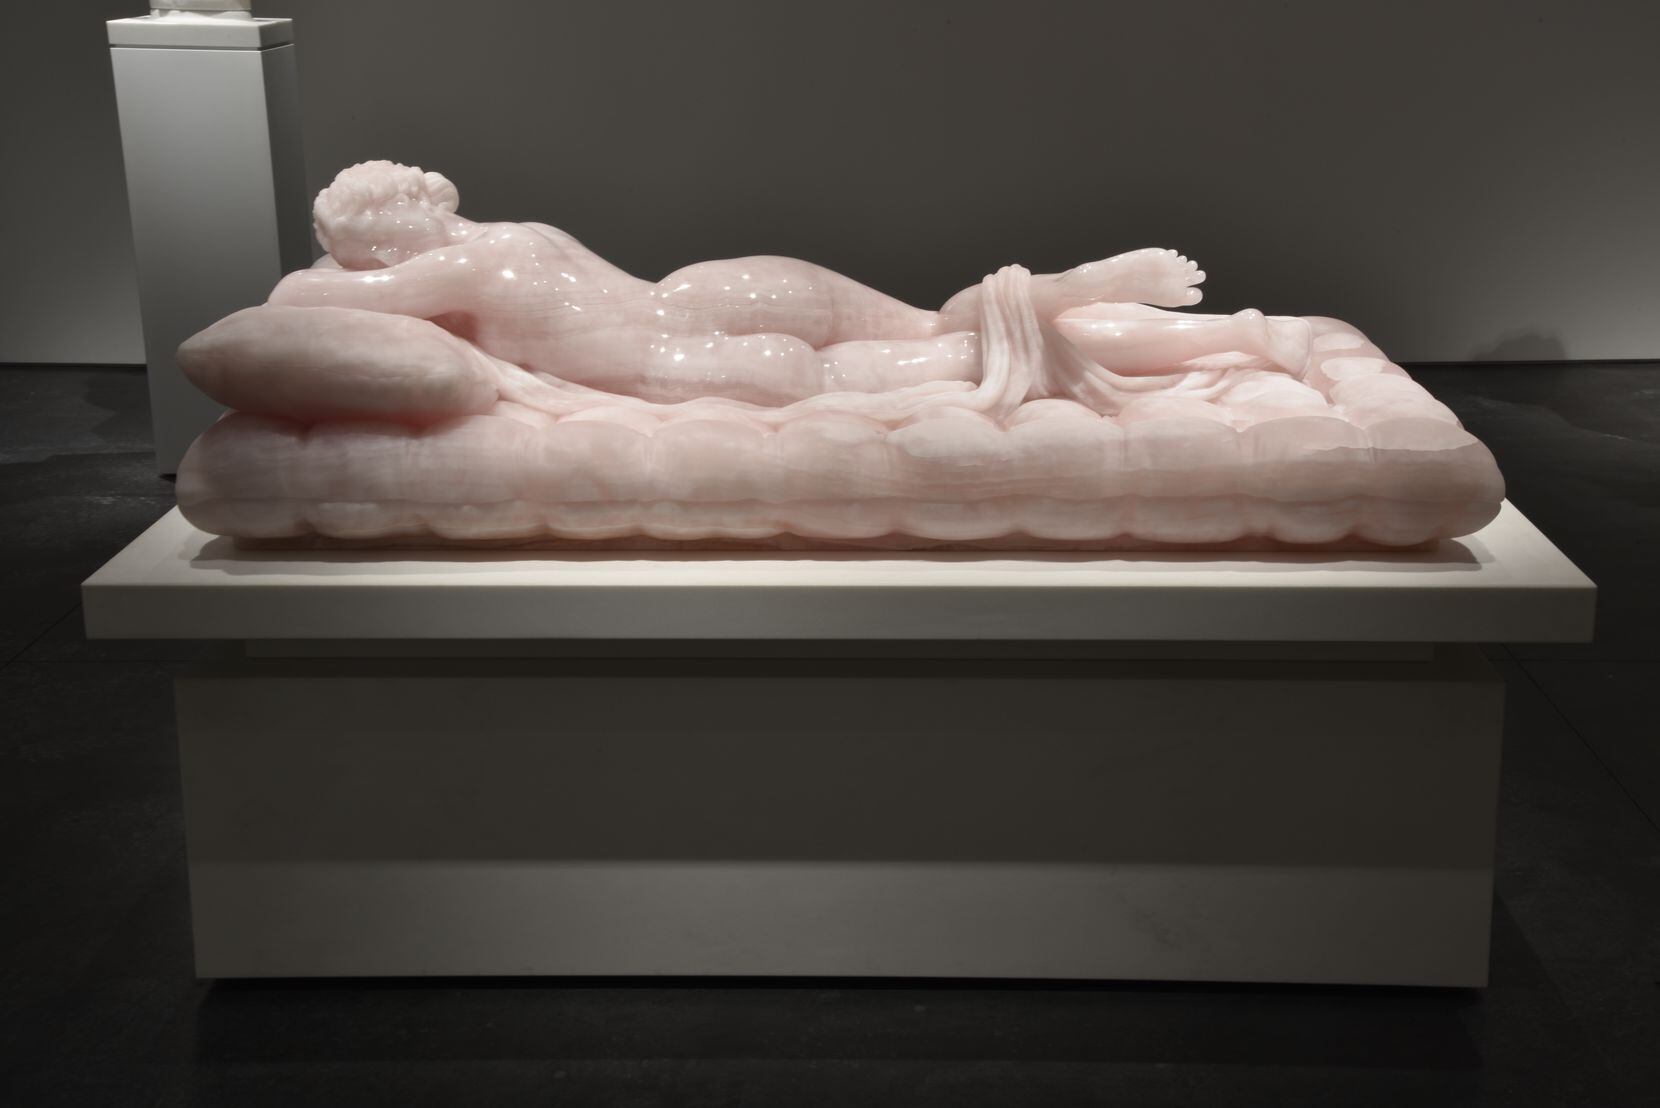 Barry X Ball's mesmerizing "Sleeping Hermaphrodite" is more striking and erotic than the...